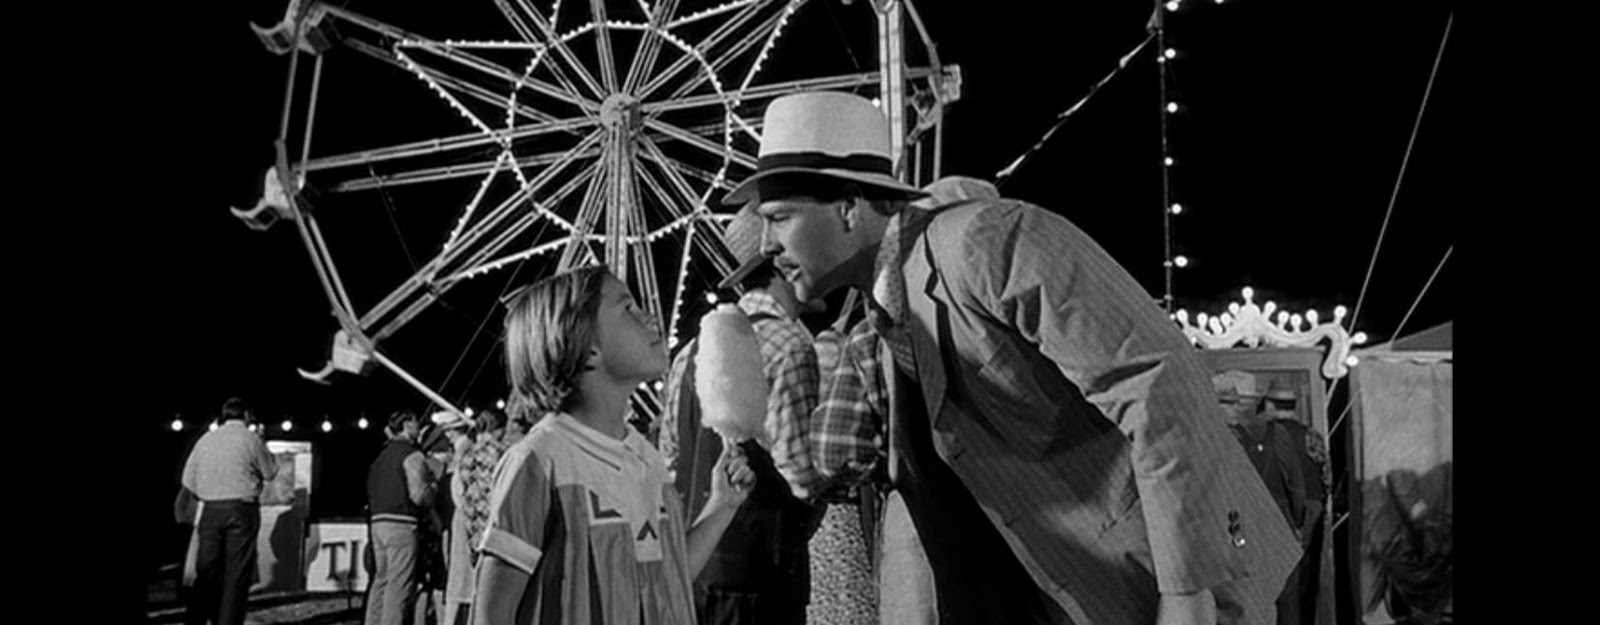 Sweetheart of the Rodeo: Paper Moon (1973)